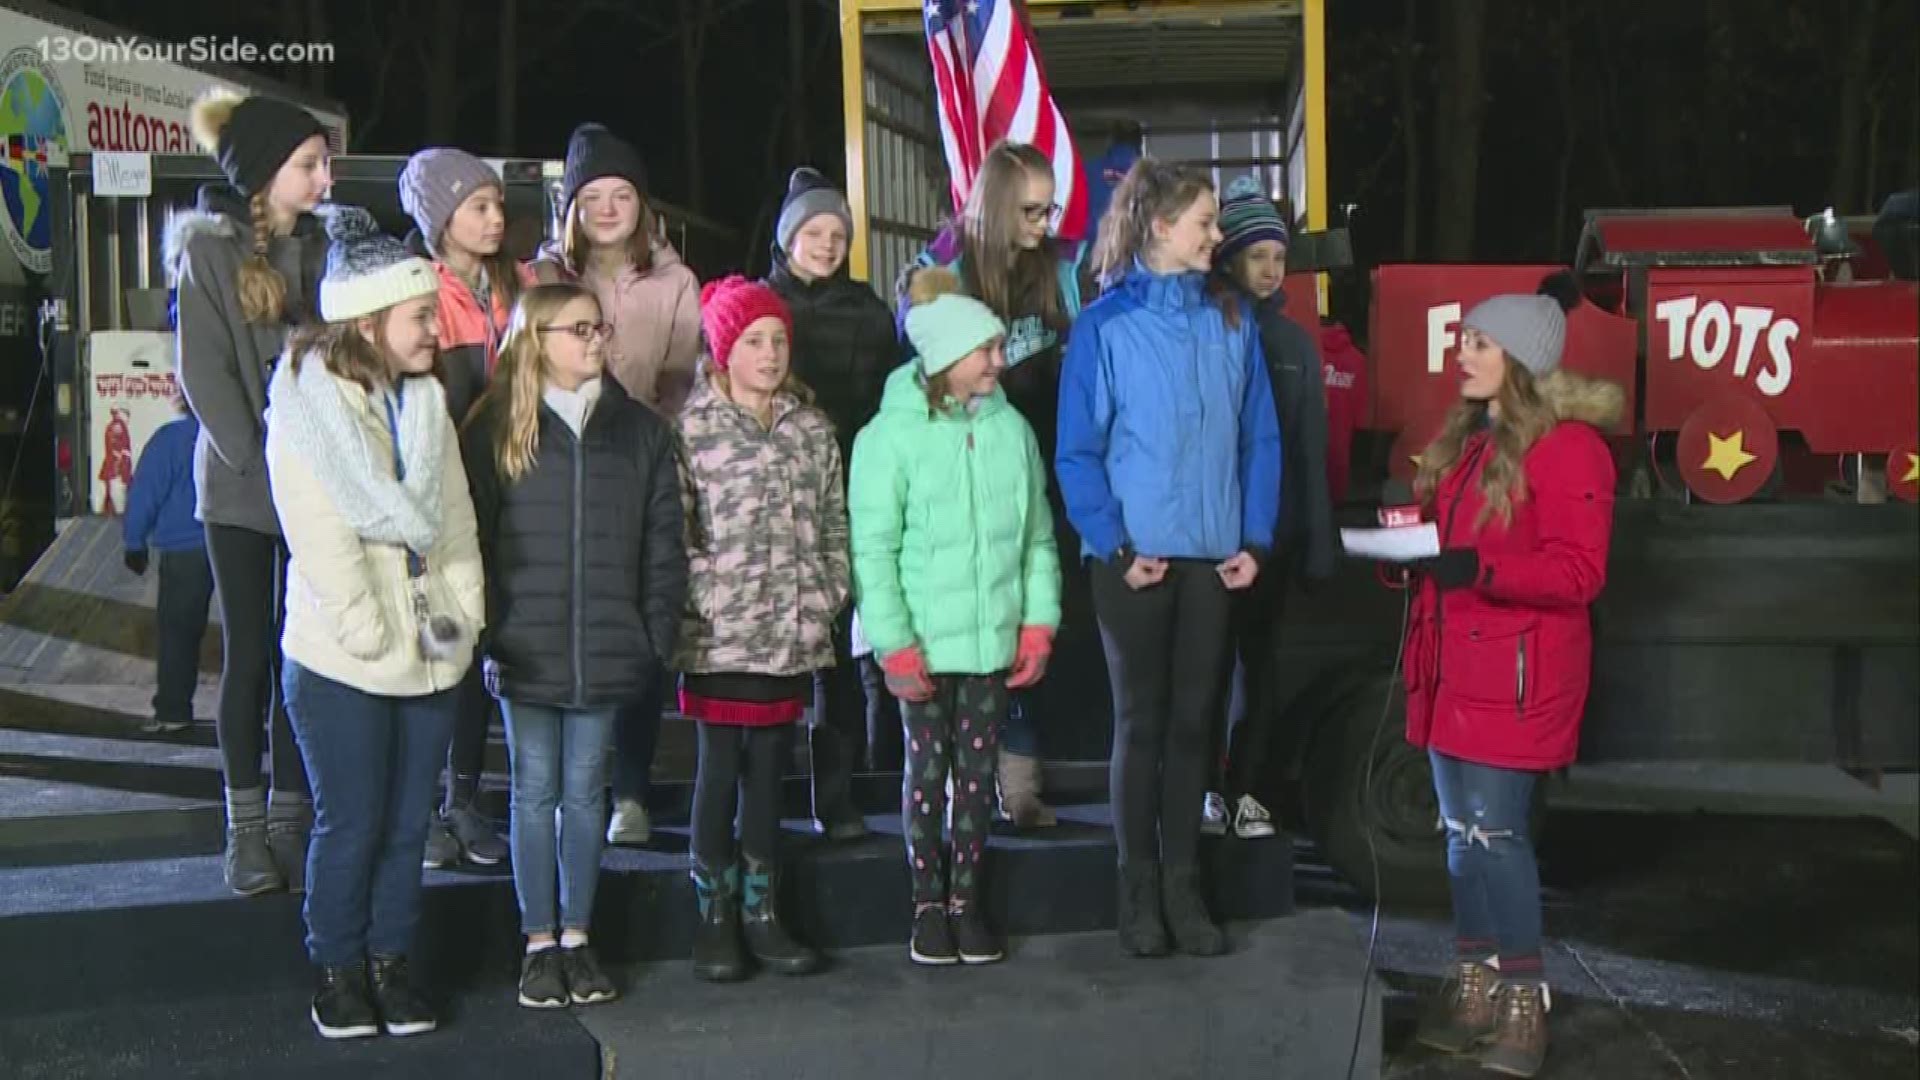 Students from Creekside Middle School in Zeeland joined 13 ON YOUR SIDE's Kamady Rudd to share how they gathered all the toys they'll donate to Toys for Tots.